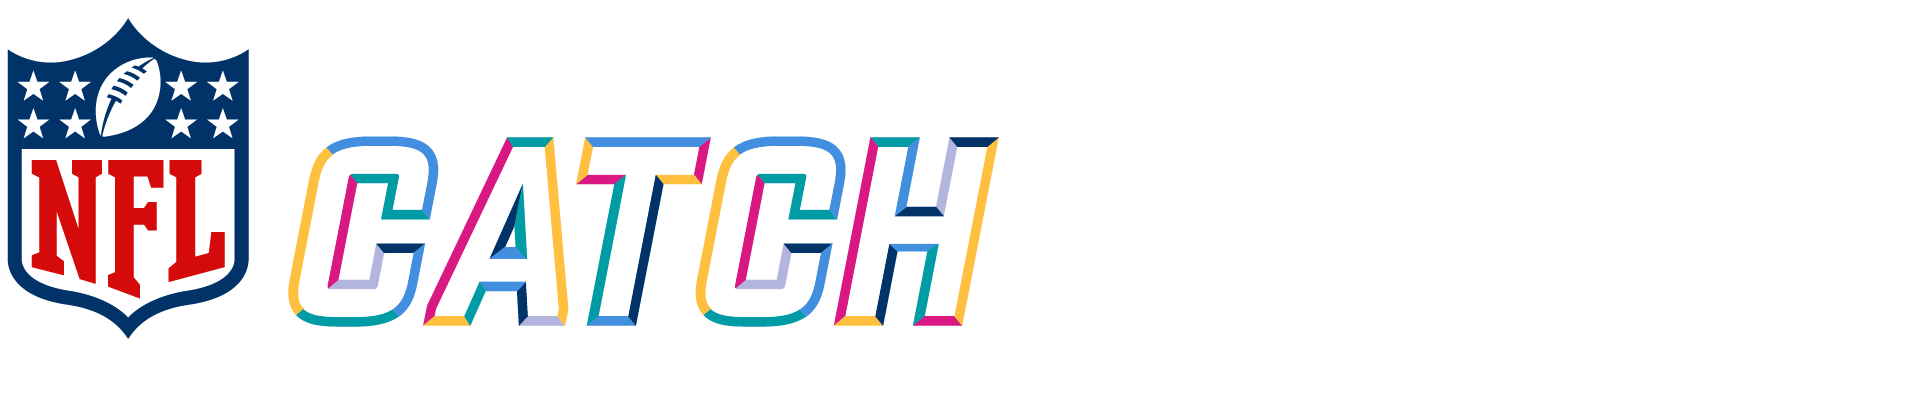 NFL Crucial Catch | American Cancer Society